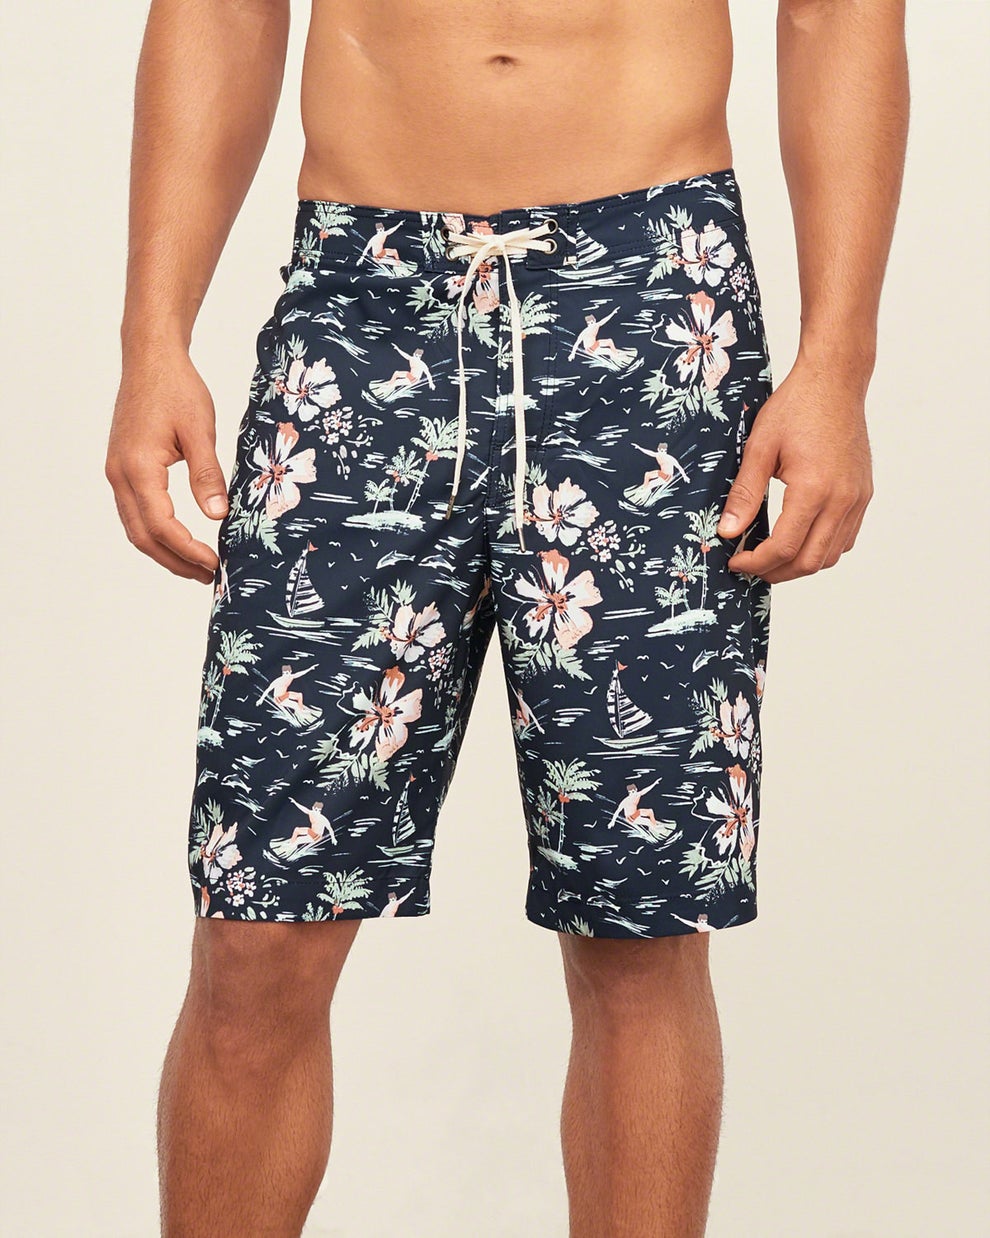 15 Swim Trunks That Will Make Guys Want To Drop Their Pants